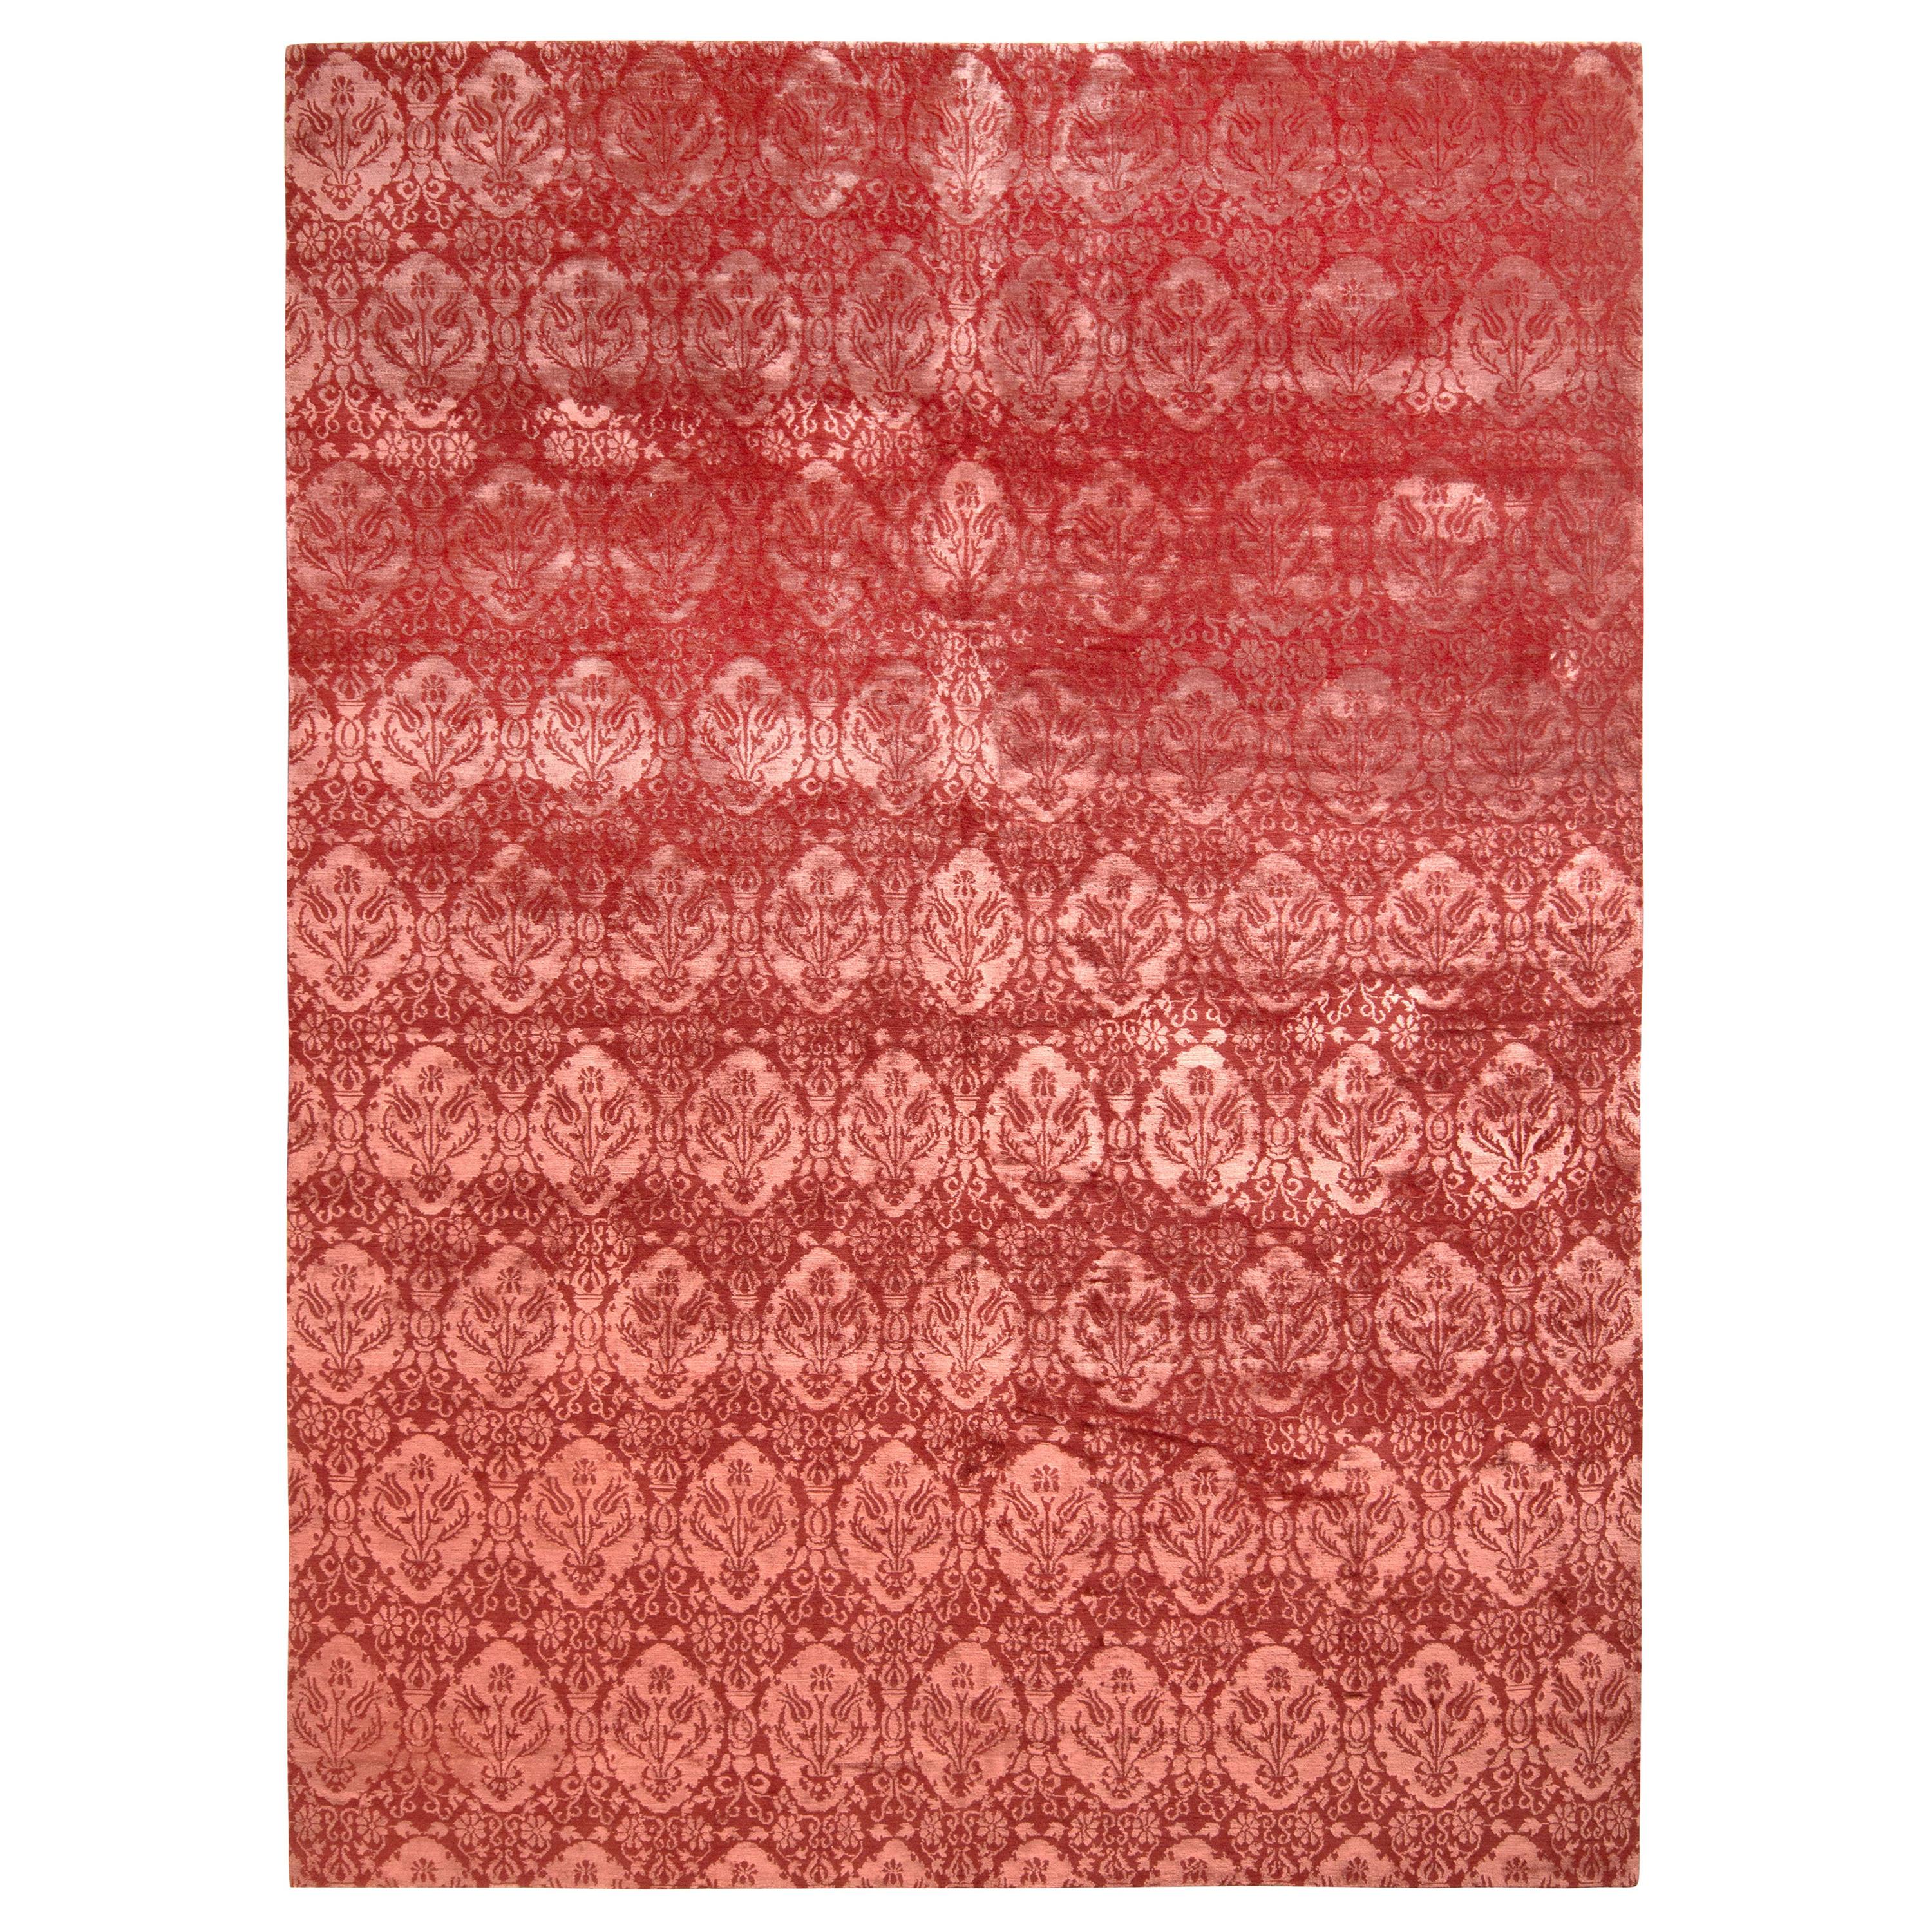 Rug & Kilim’s European Style Rug in Red Pink Floral Pattern For Sale